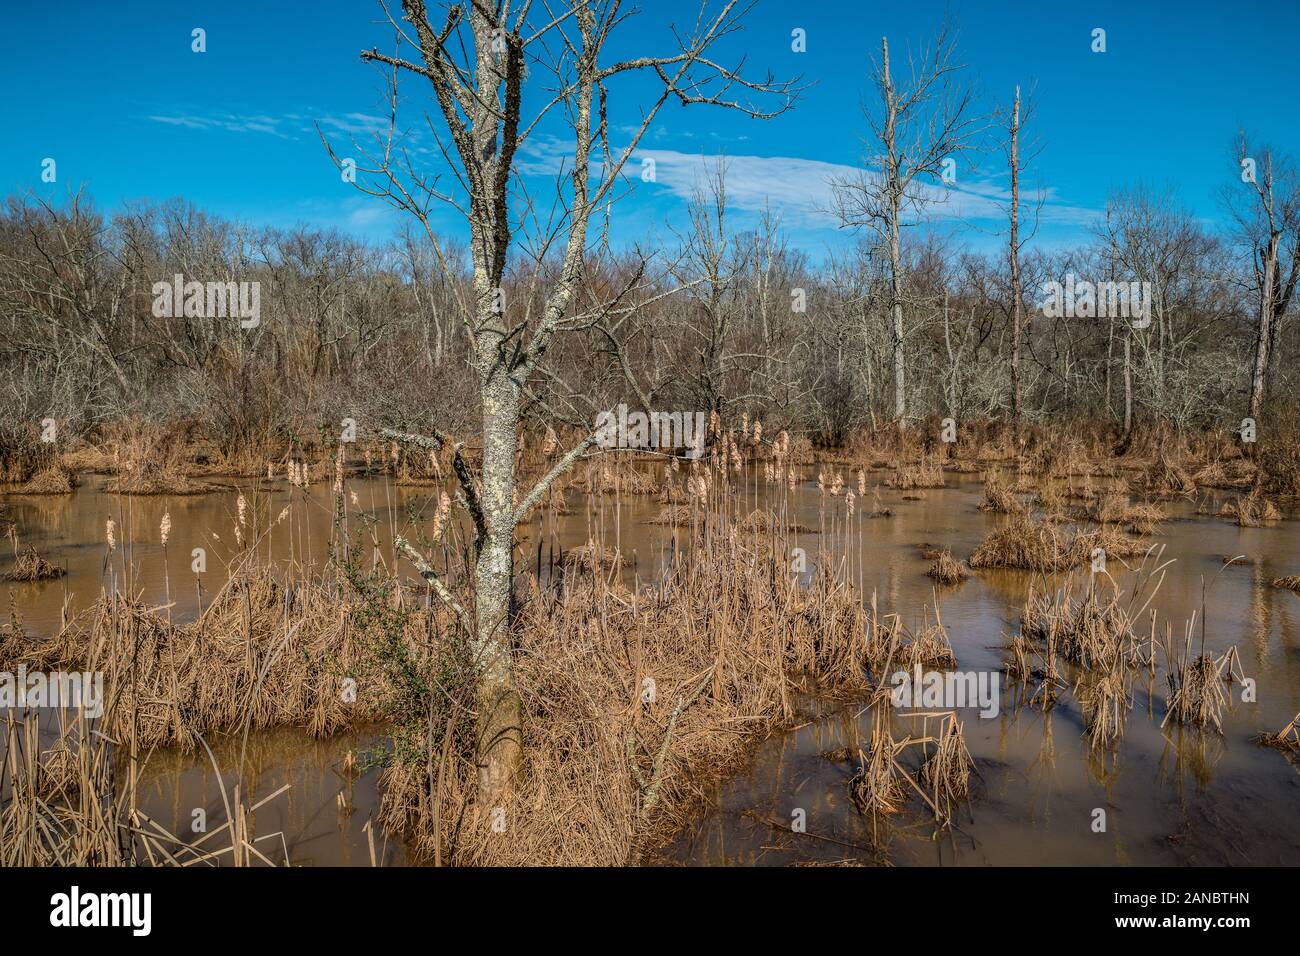 A tree in the foreground with dead cattails and tall grasses in the water at the wetlands with the woodlands in the background on a bright sunny day i Stock Photo